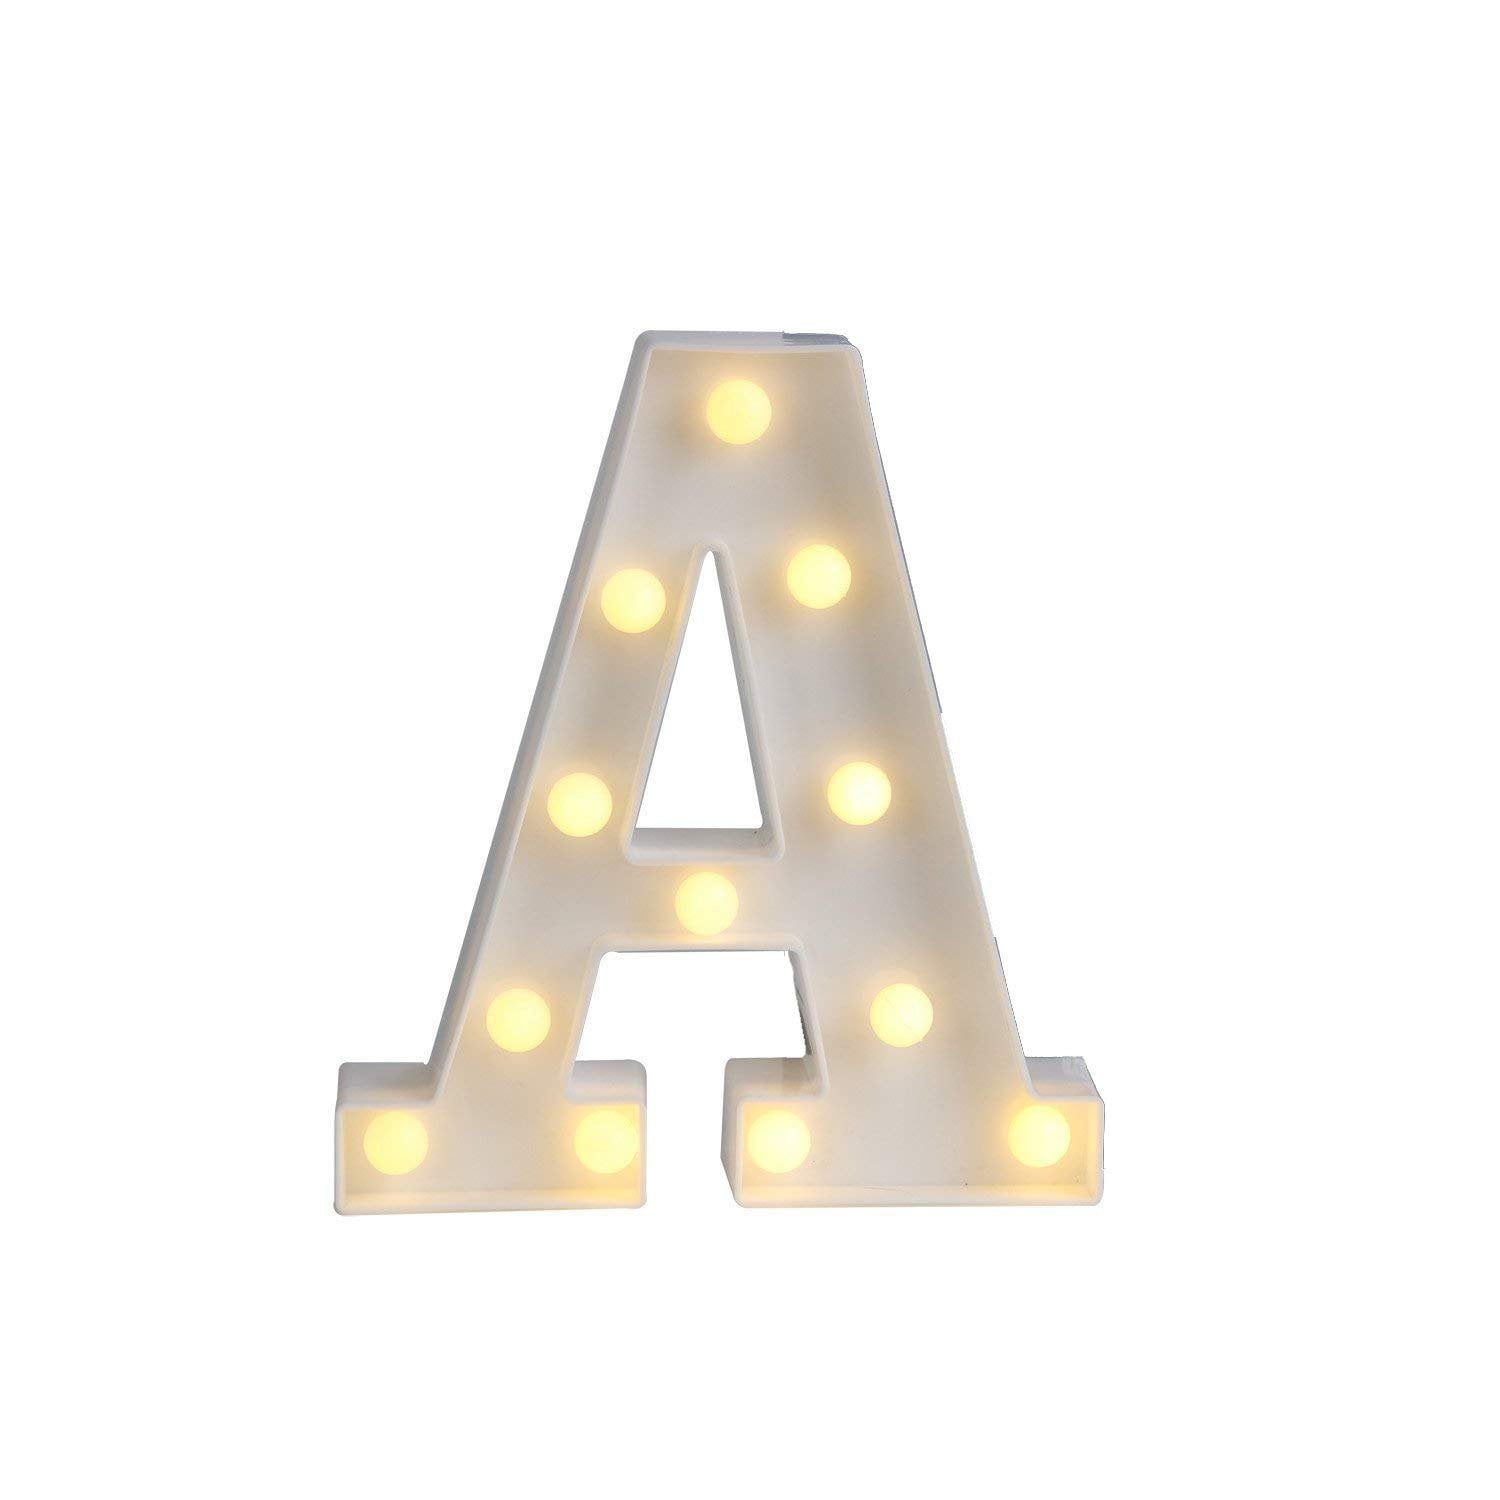 Alphabet Love LED Letters Light Up White Red Night Party Stand Hanging Decors 